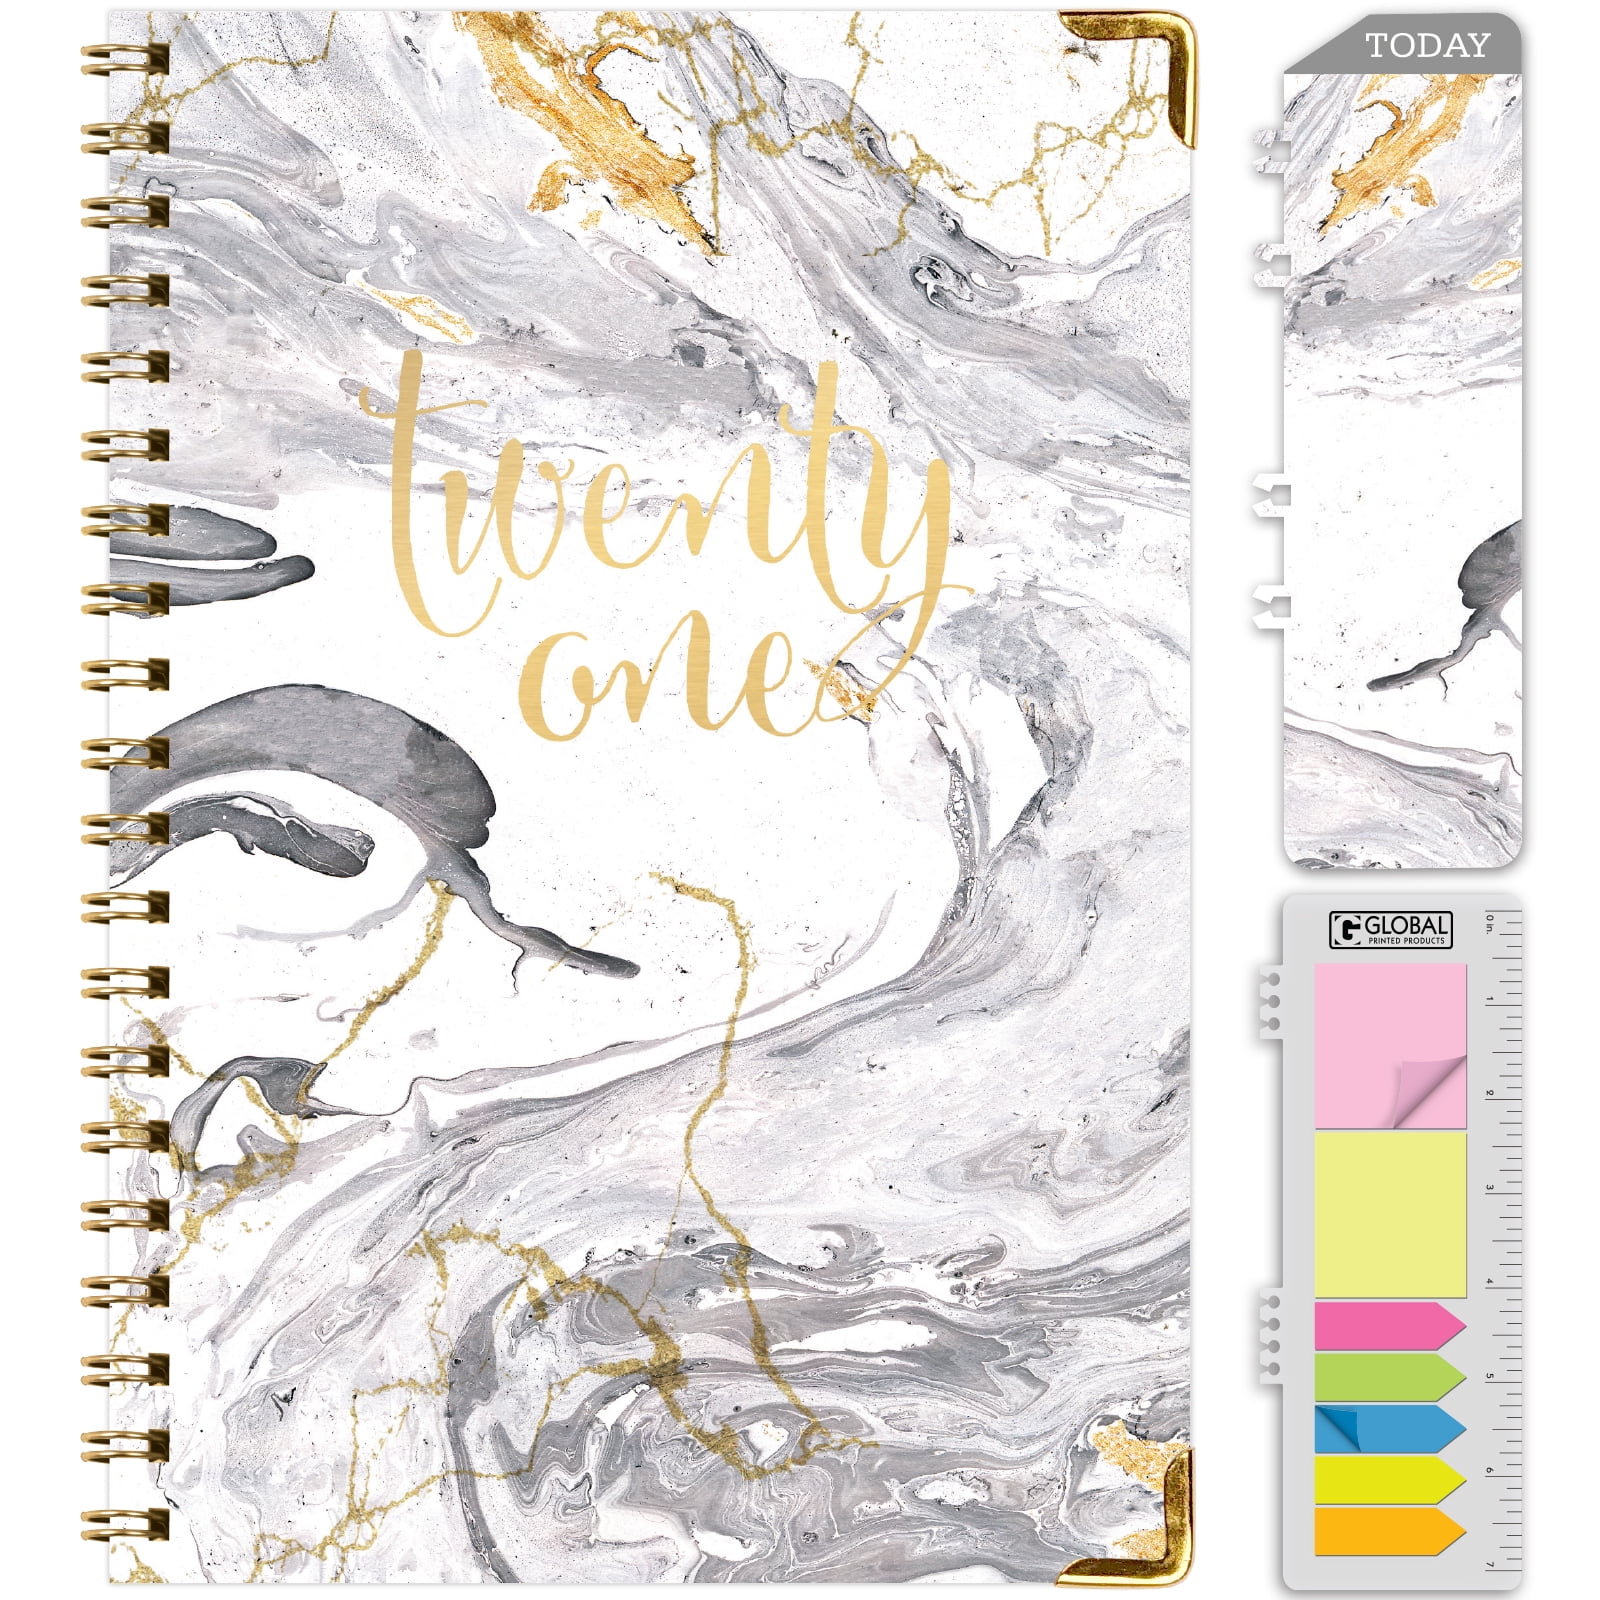 Nov 2020 - Dec 2021 HARDCOVER  2021 Planner Daily Weekly Monthly Planner 